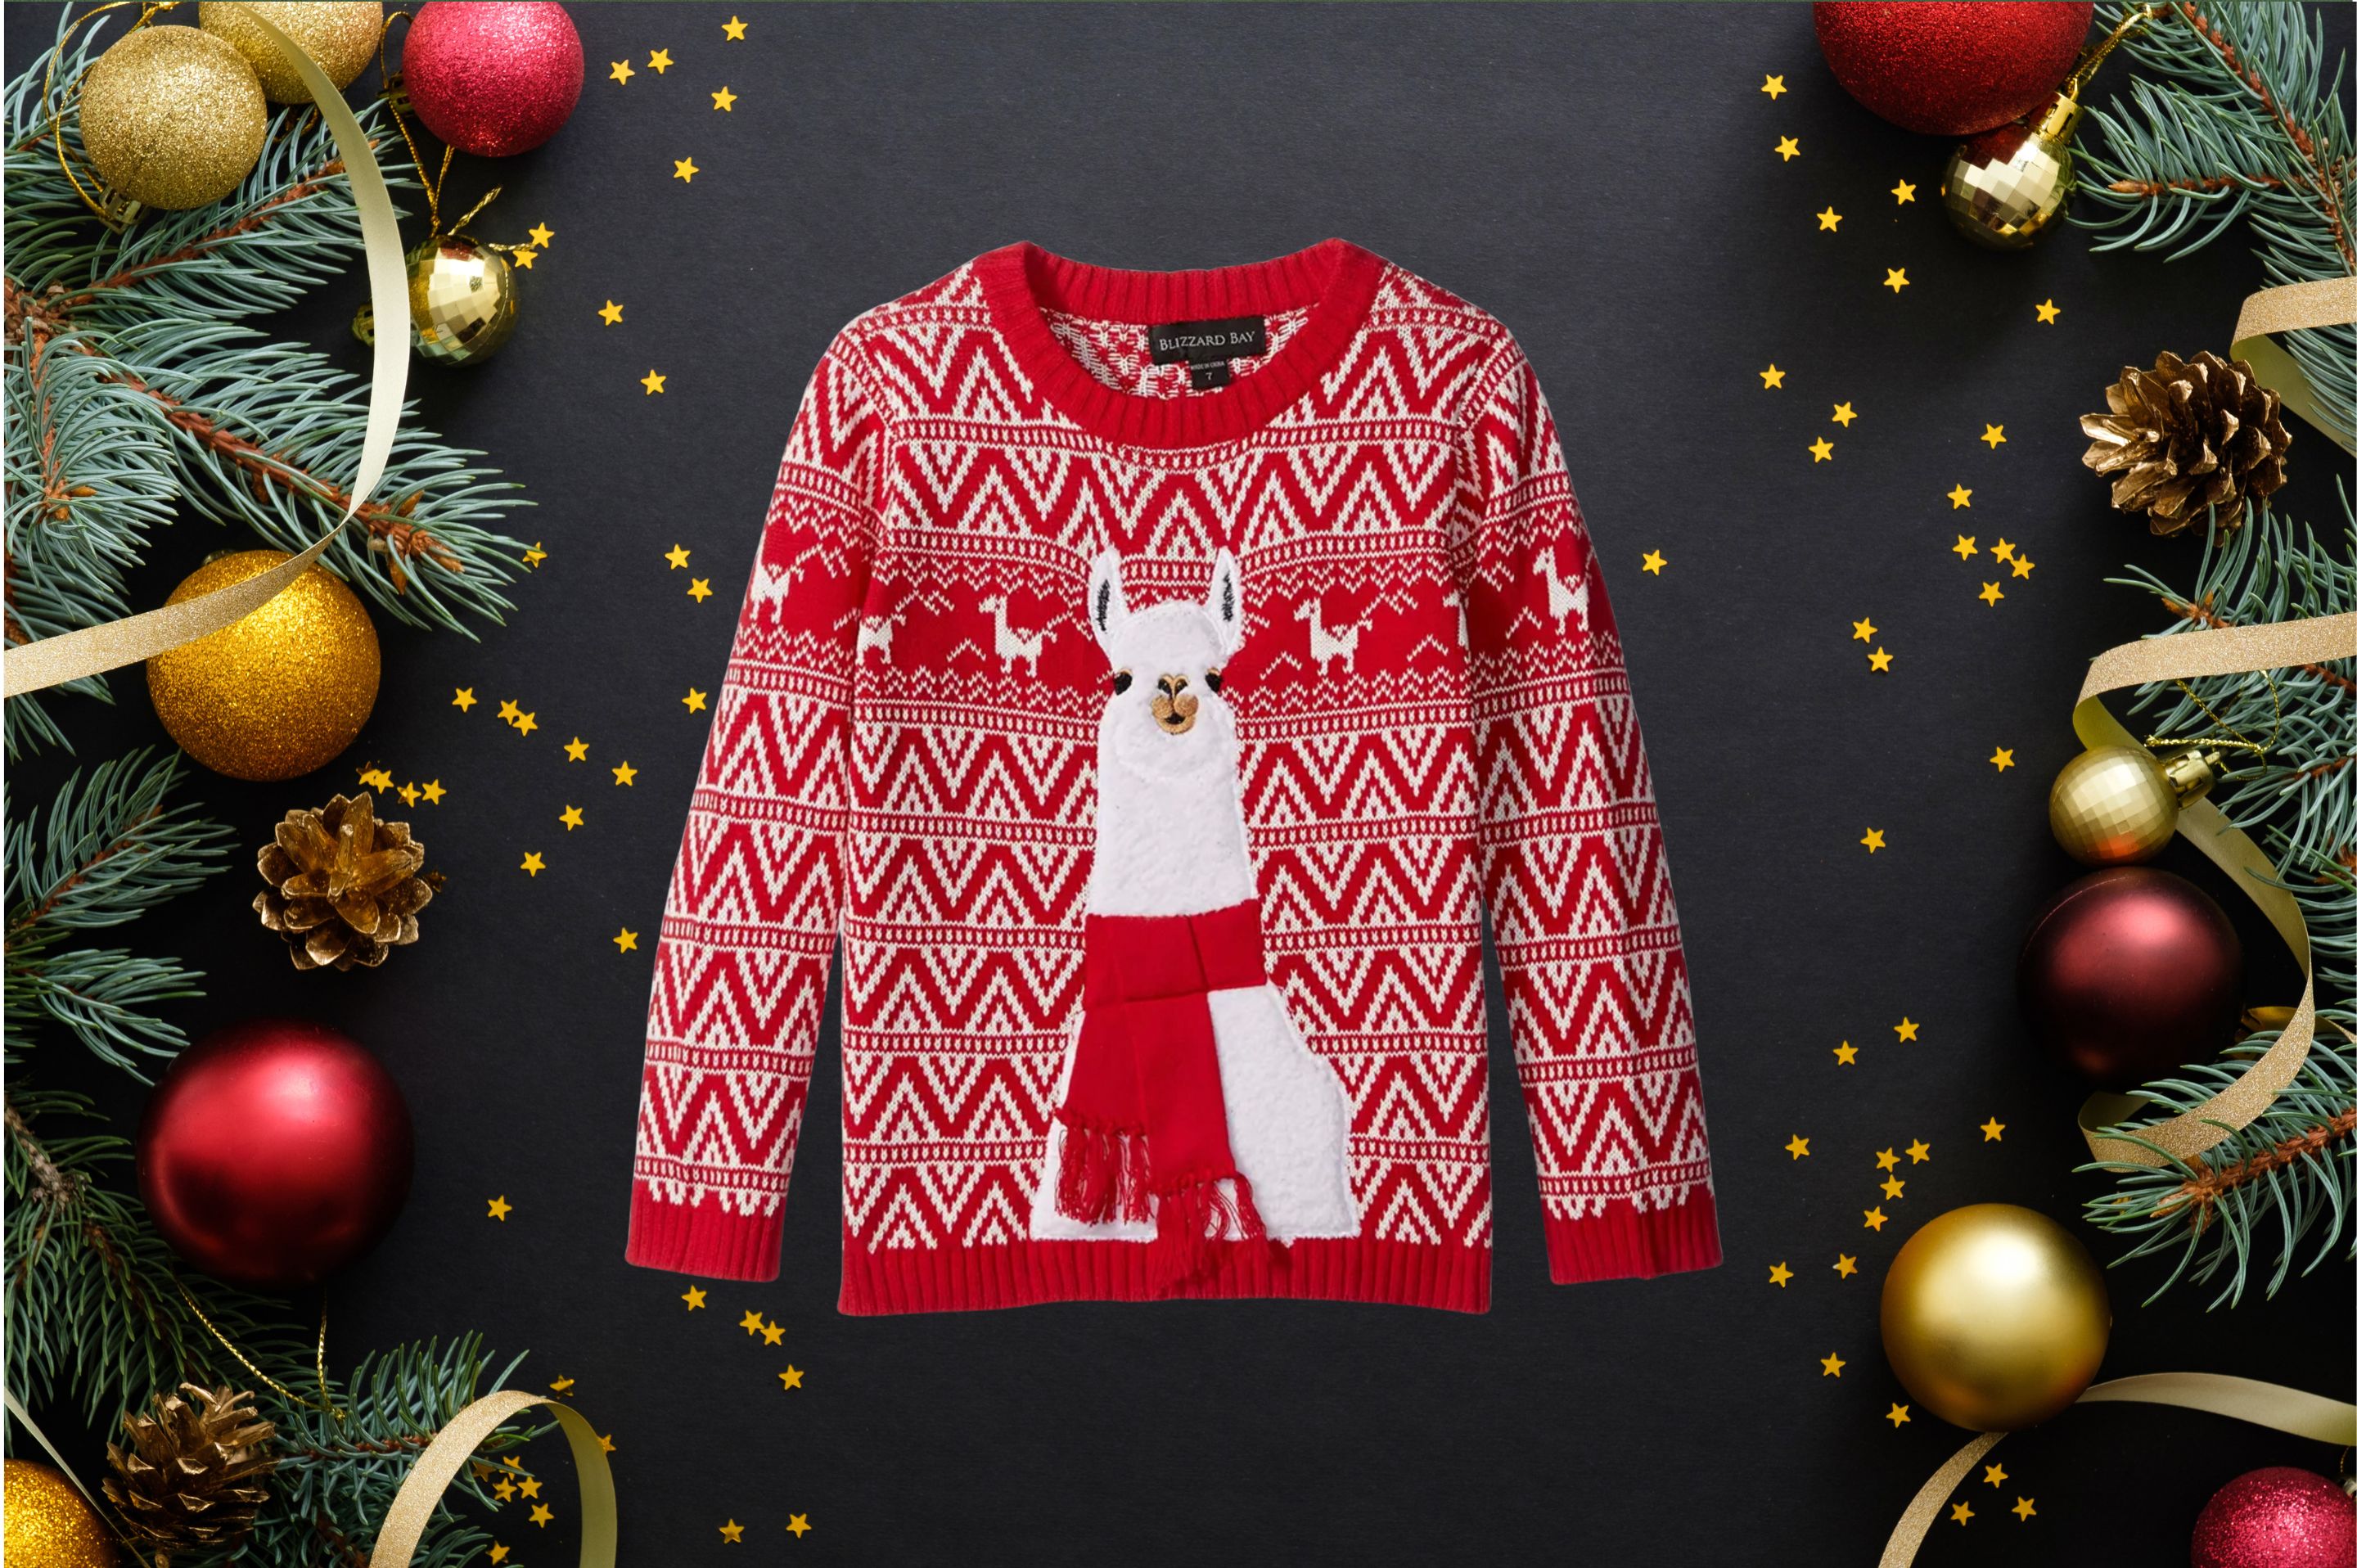 Mens Ugly Christmas Sweater: Our Editor's Picks